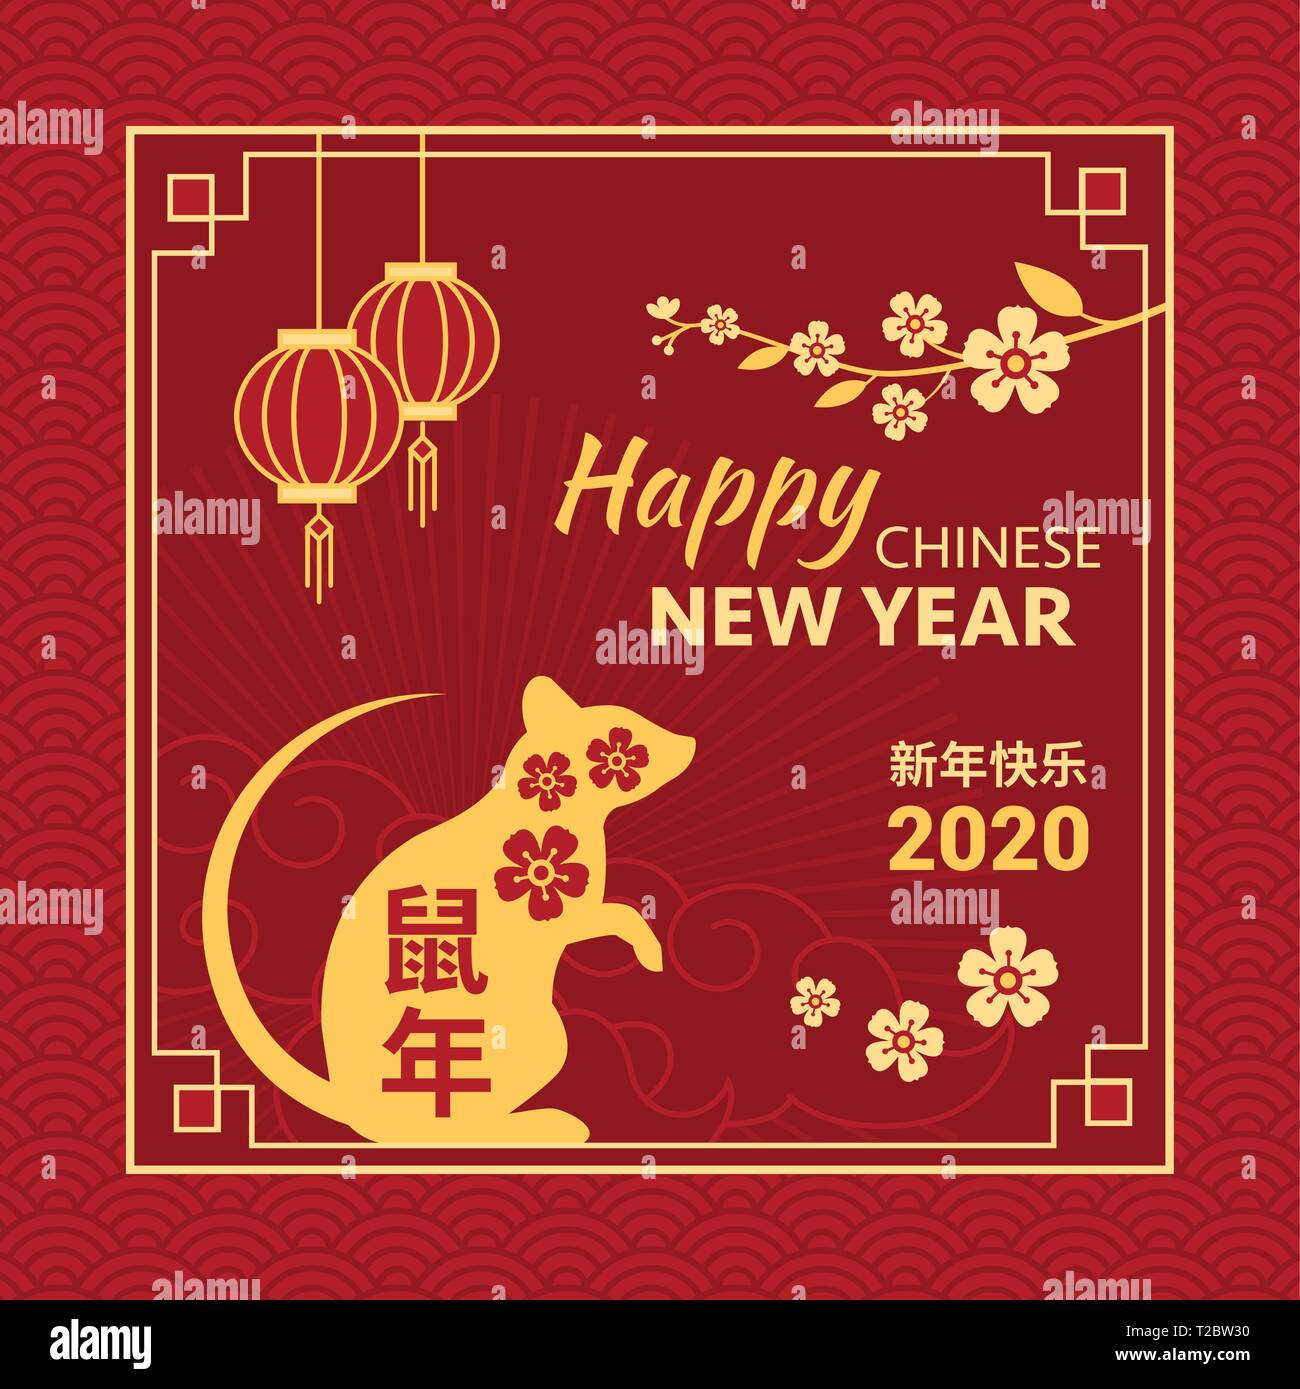 Happy Chinese New Year card and social media post with rat, blossom flowers and red lanterns Stock Vector